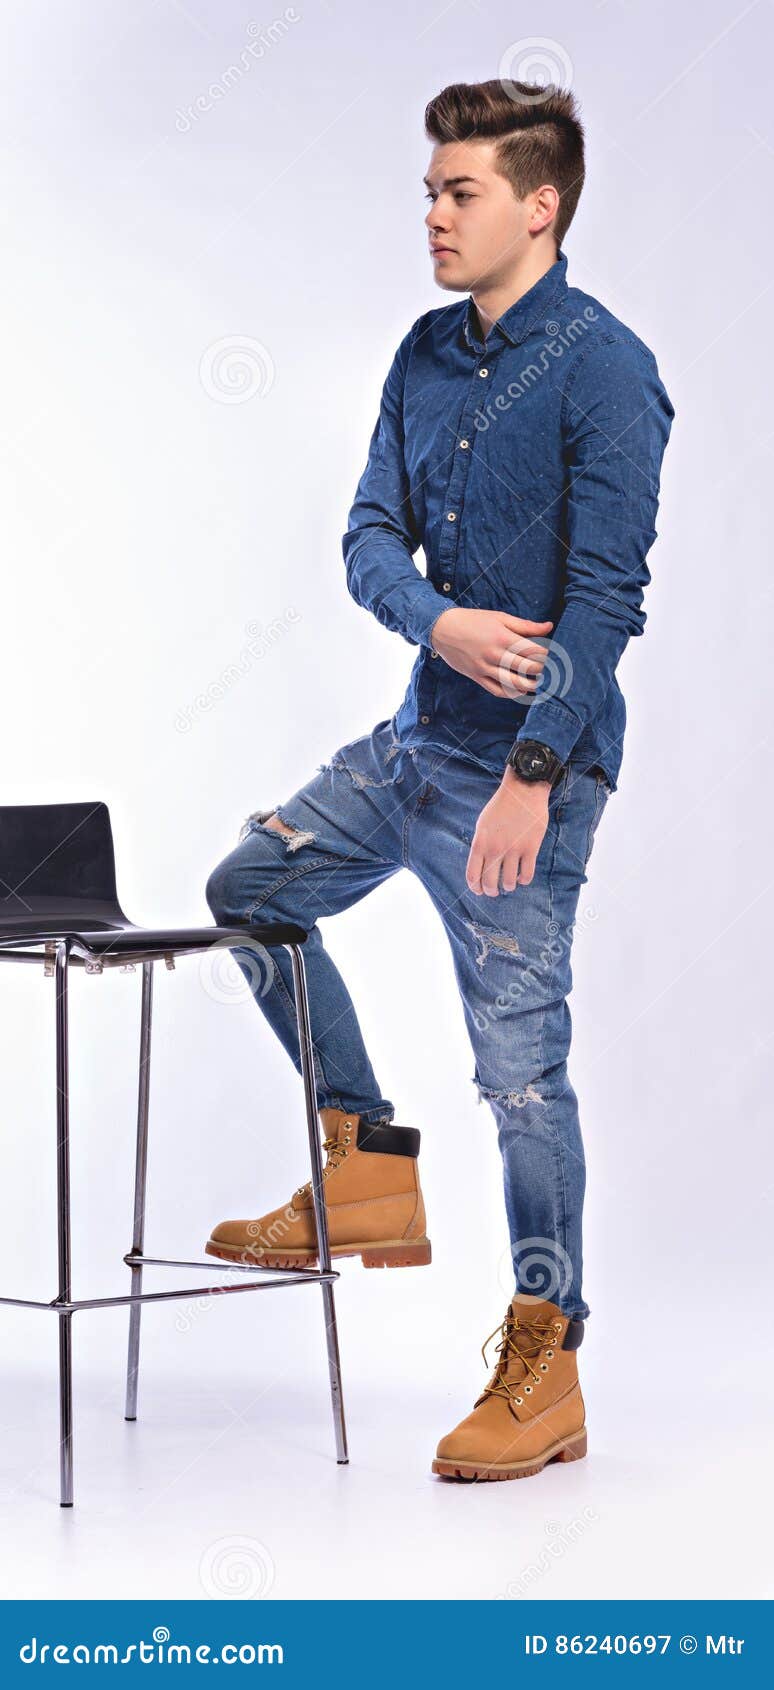 Male Model In Denim Jeans And Boots Stock Image Image Of Legs Blue